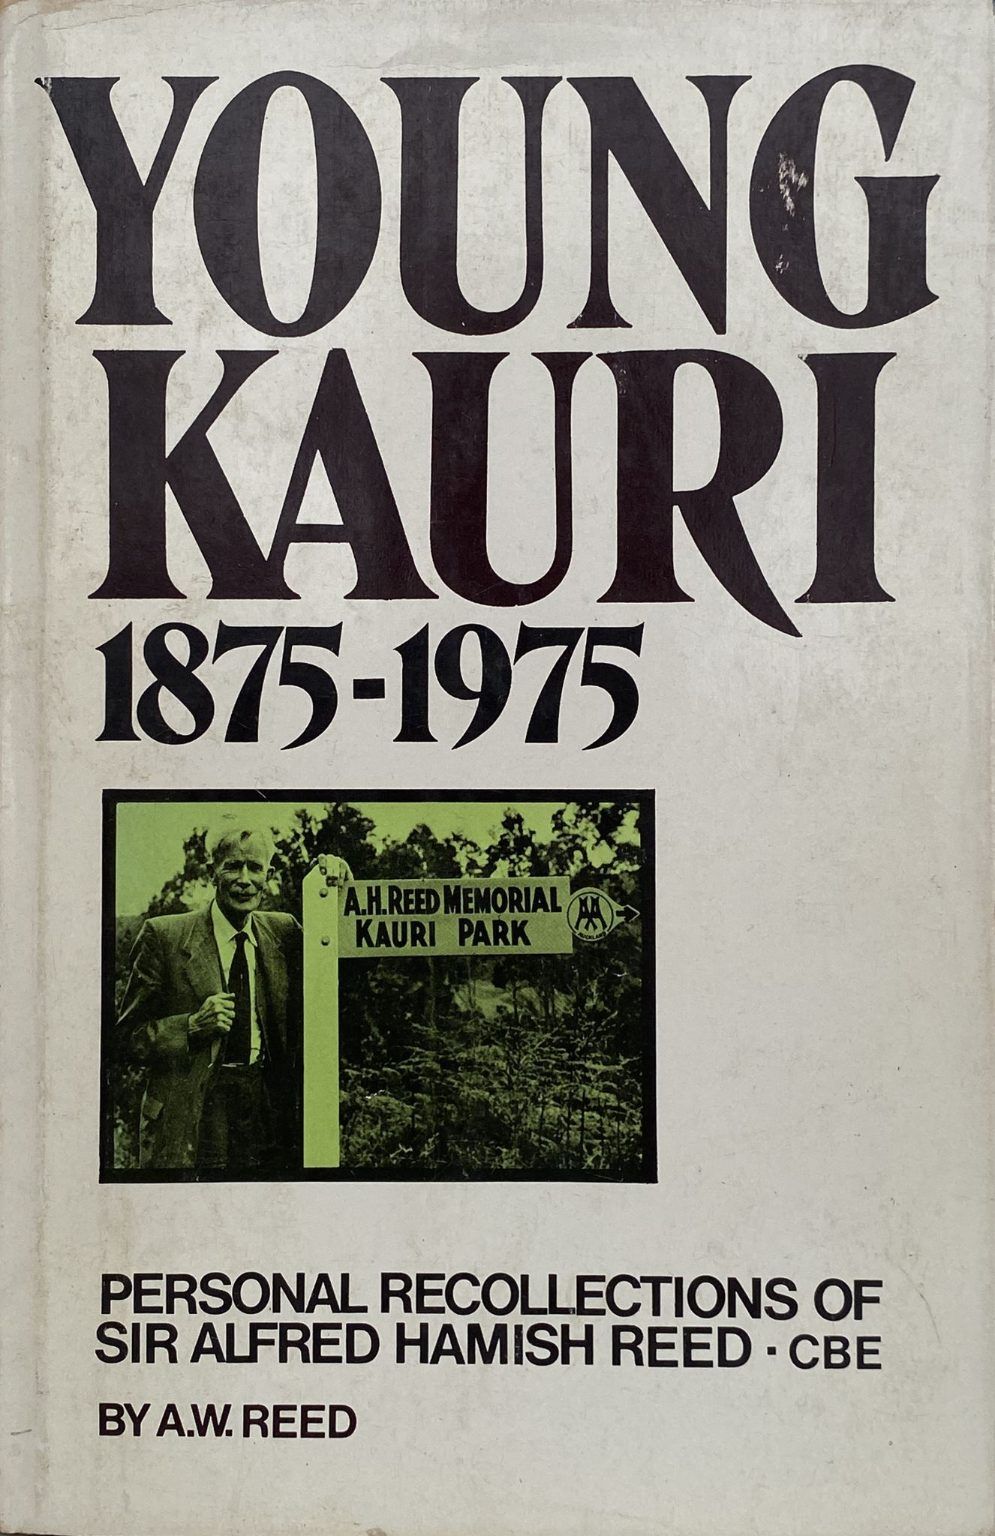 YOUNG KAURI 1875-1975: Personal Recollections of Sir Alfred Hamish Reed